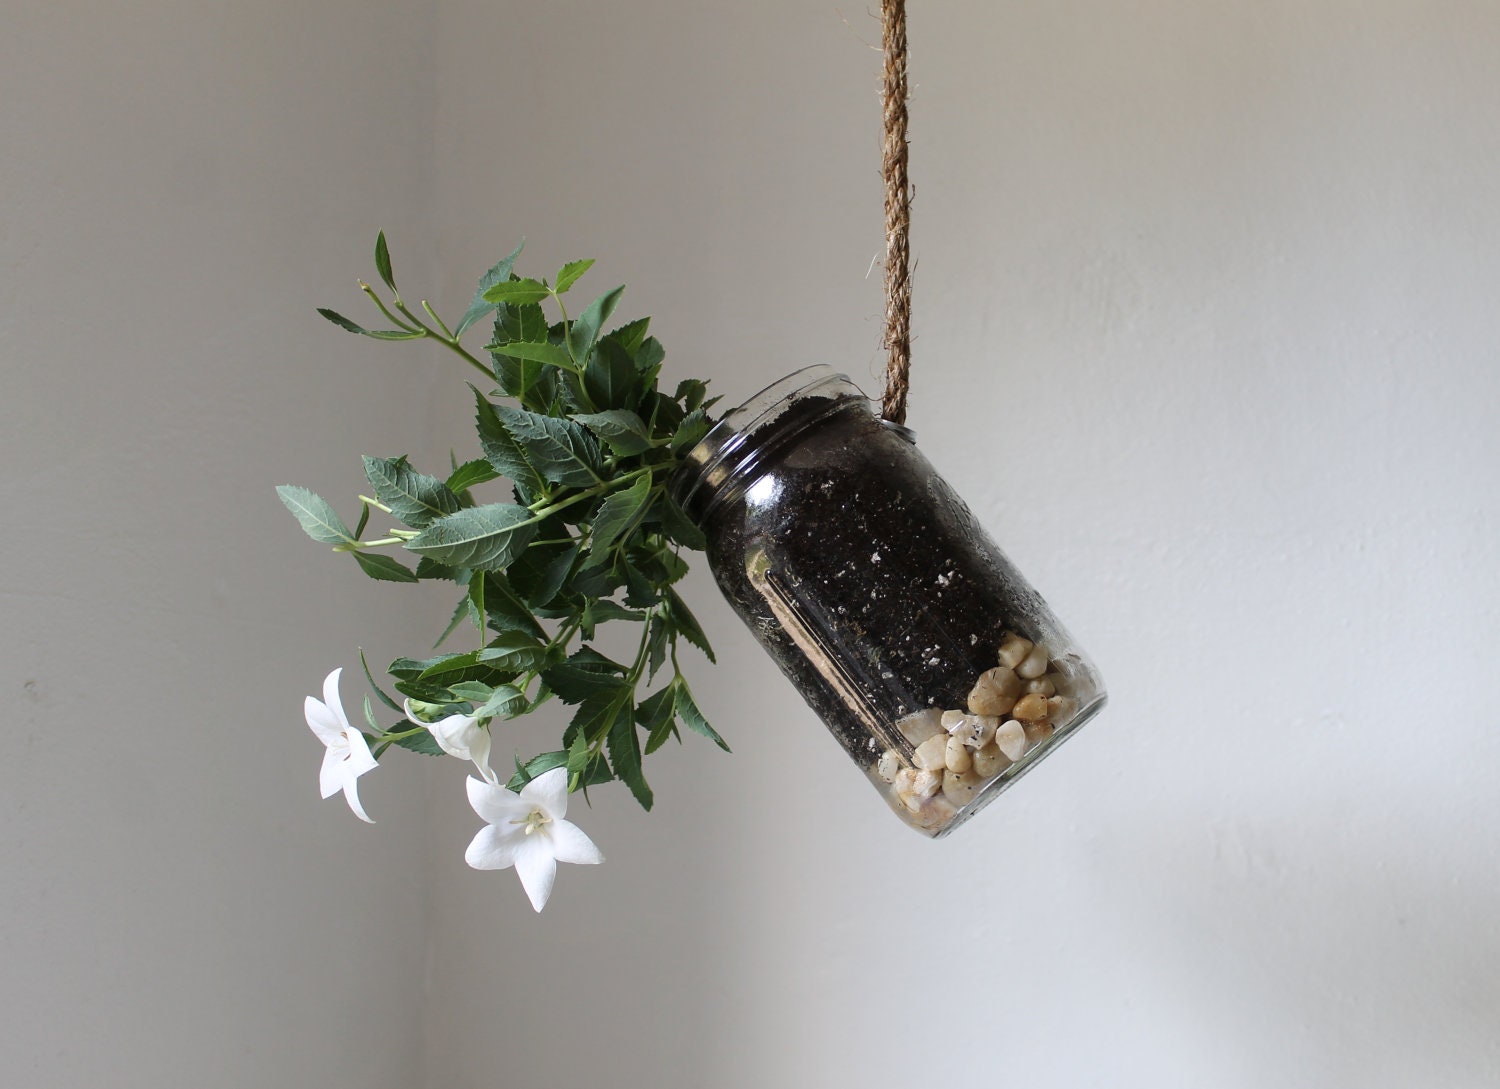 Hanging Mason Jar Planter with drainage - Upcycled home & garden decor - Quart Sized Ball Jar herb and flower planter - BootsNGus design